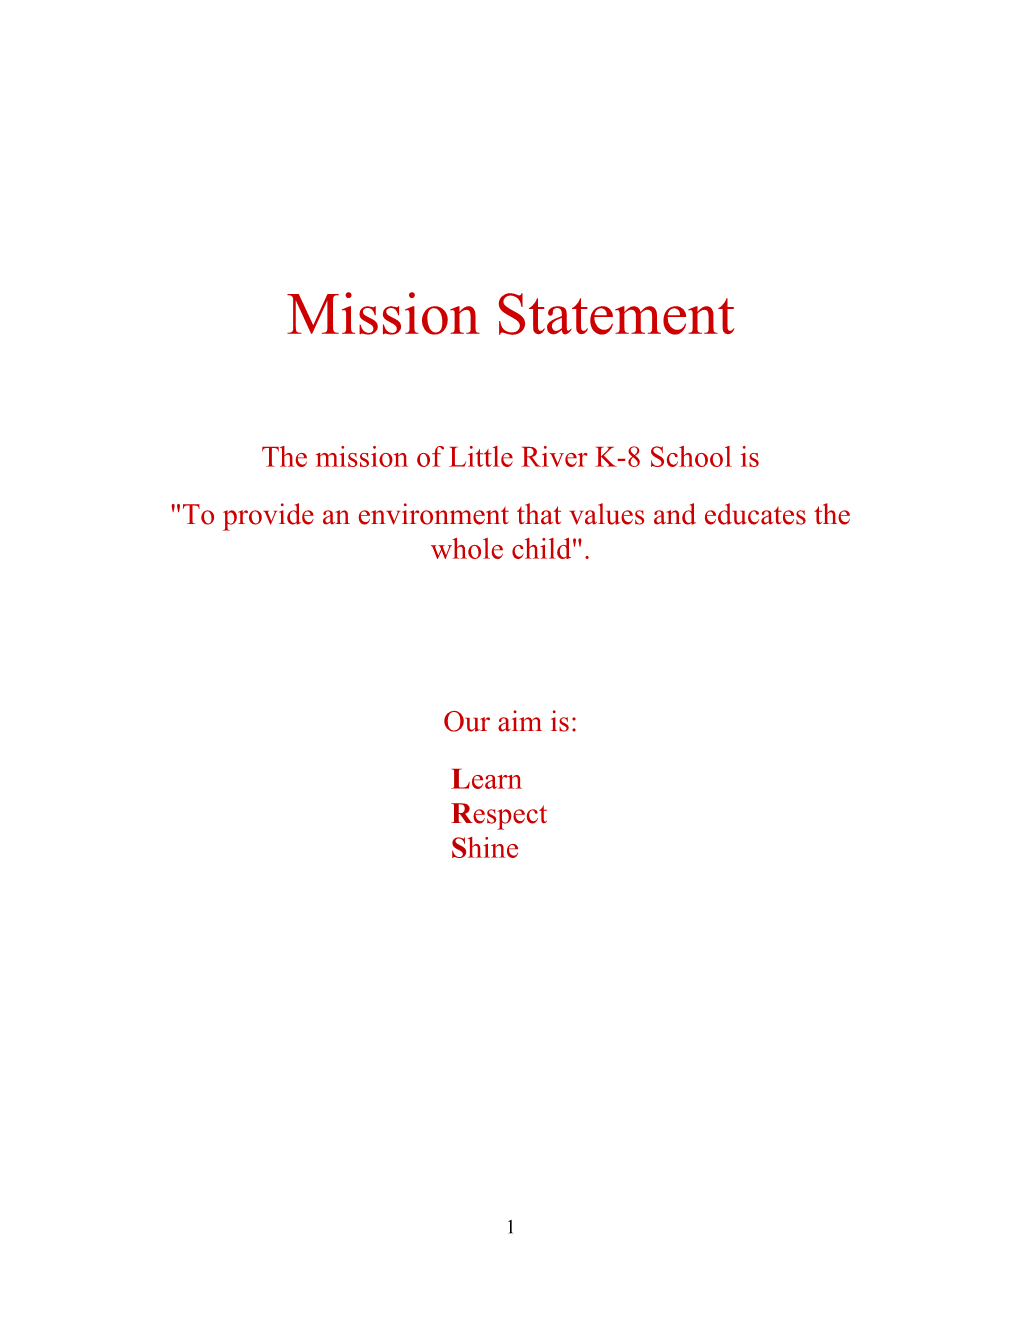 The Mission of Little River K-8 School Is